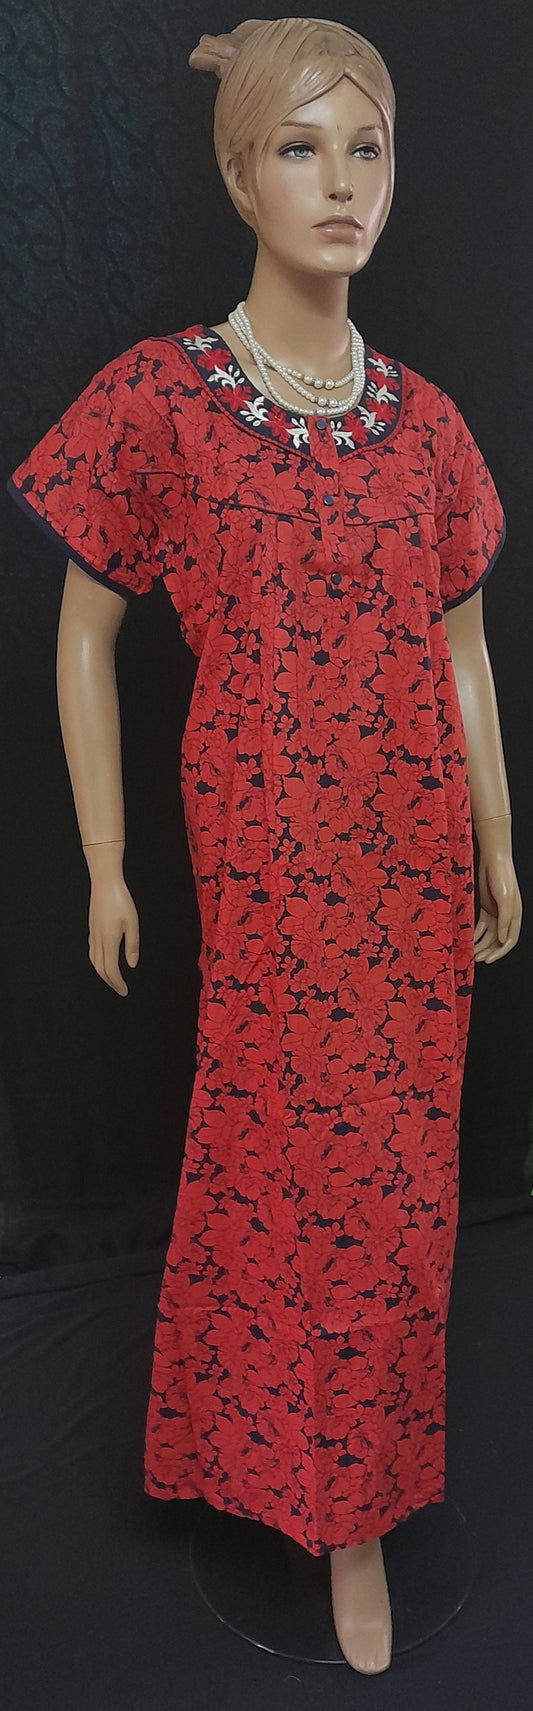 Navy Blue Red Printed Women's Short Sleeve Cotton Nighty - Size (46)